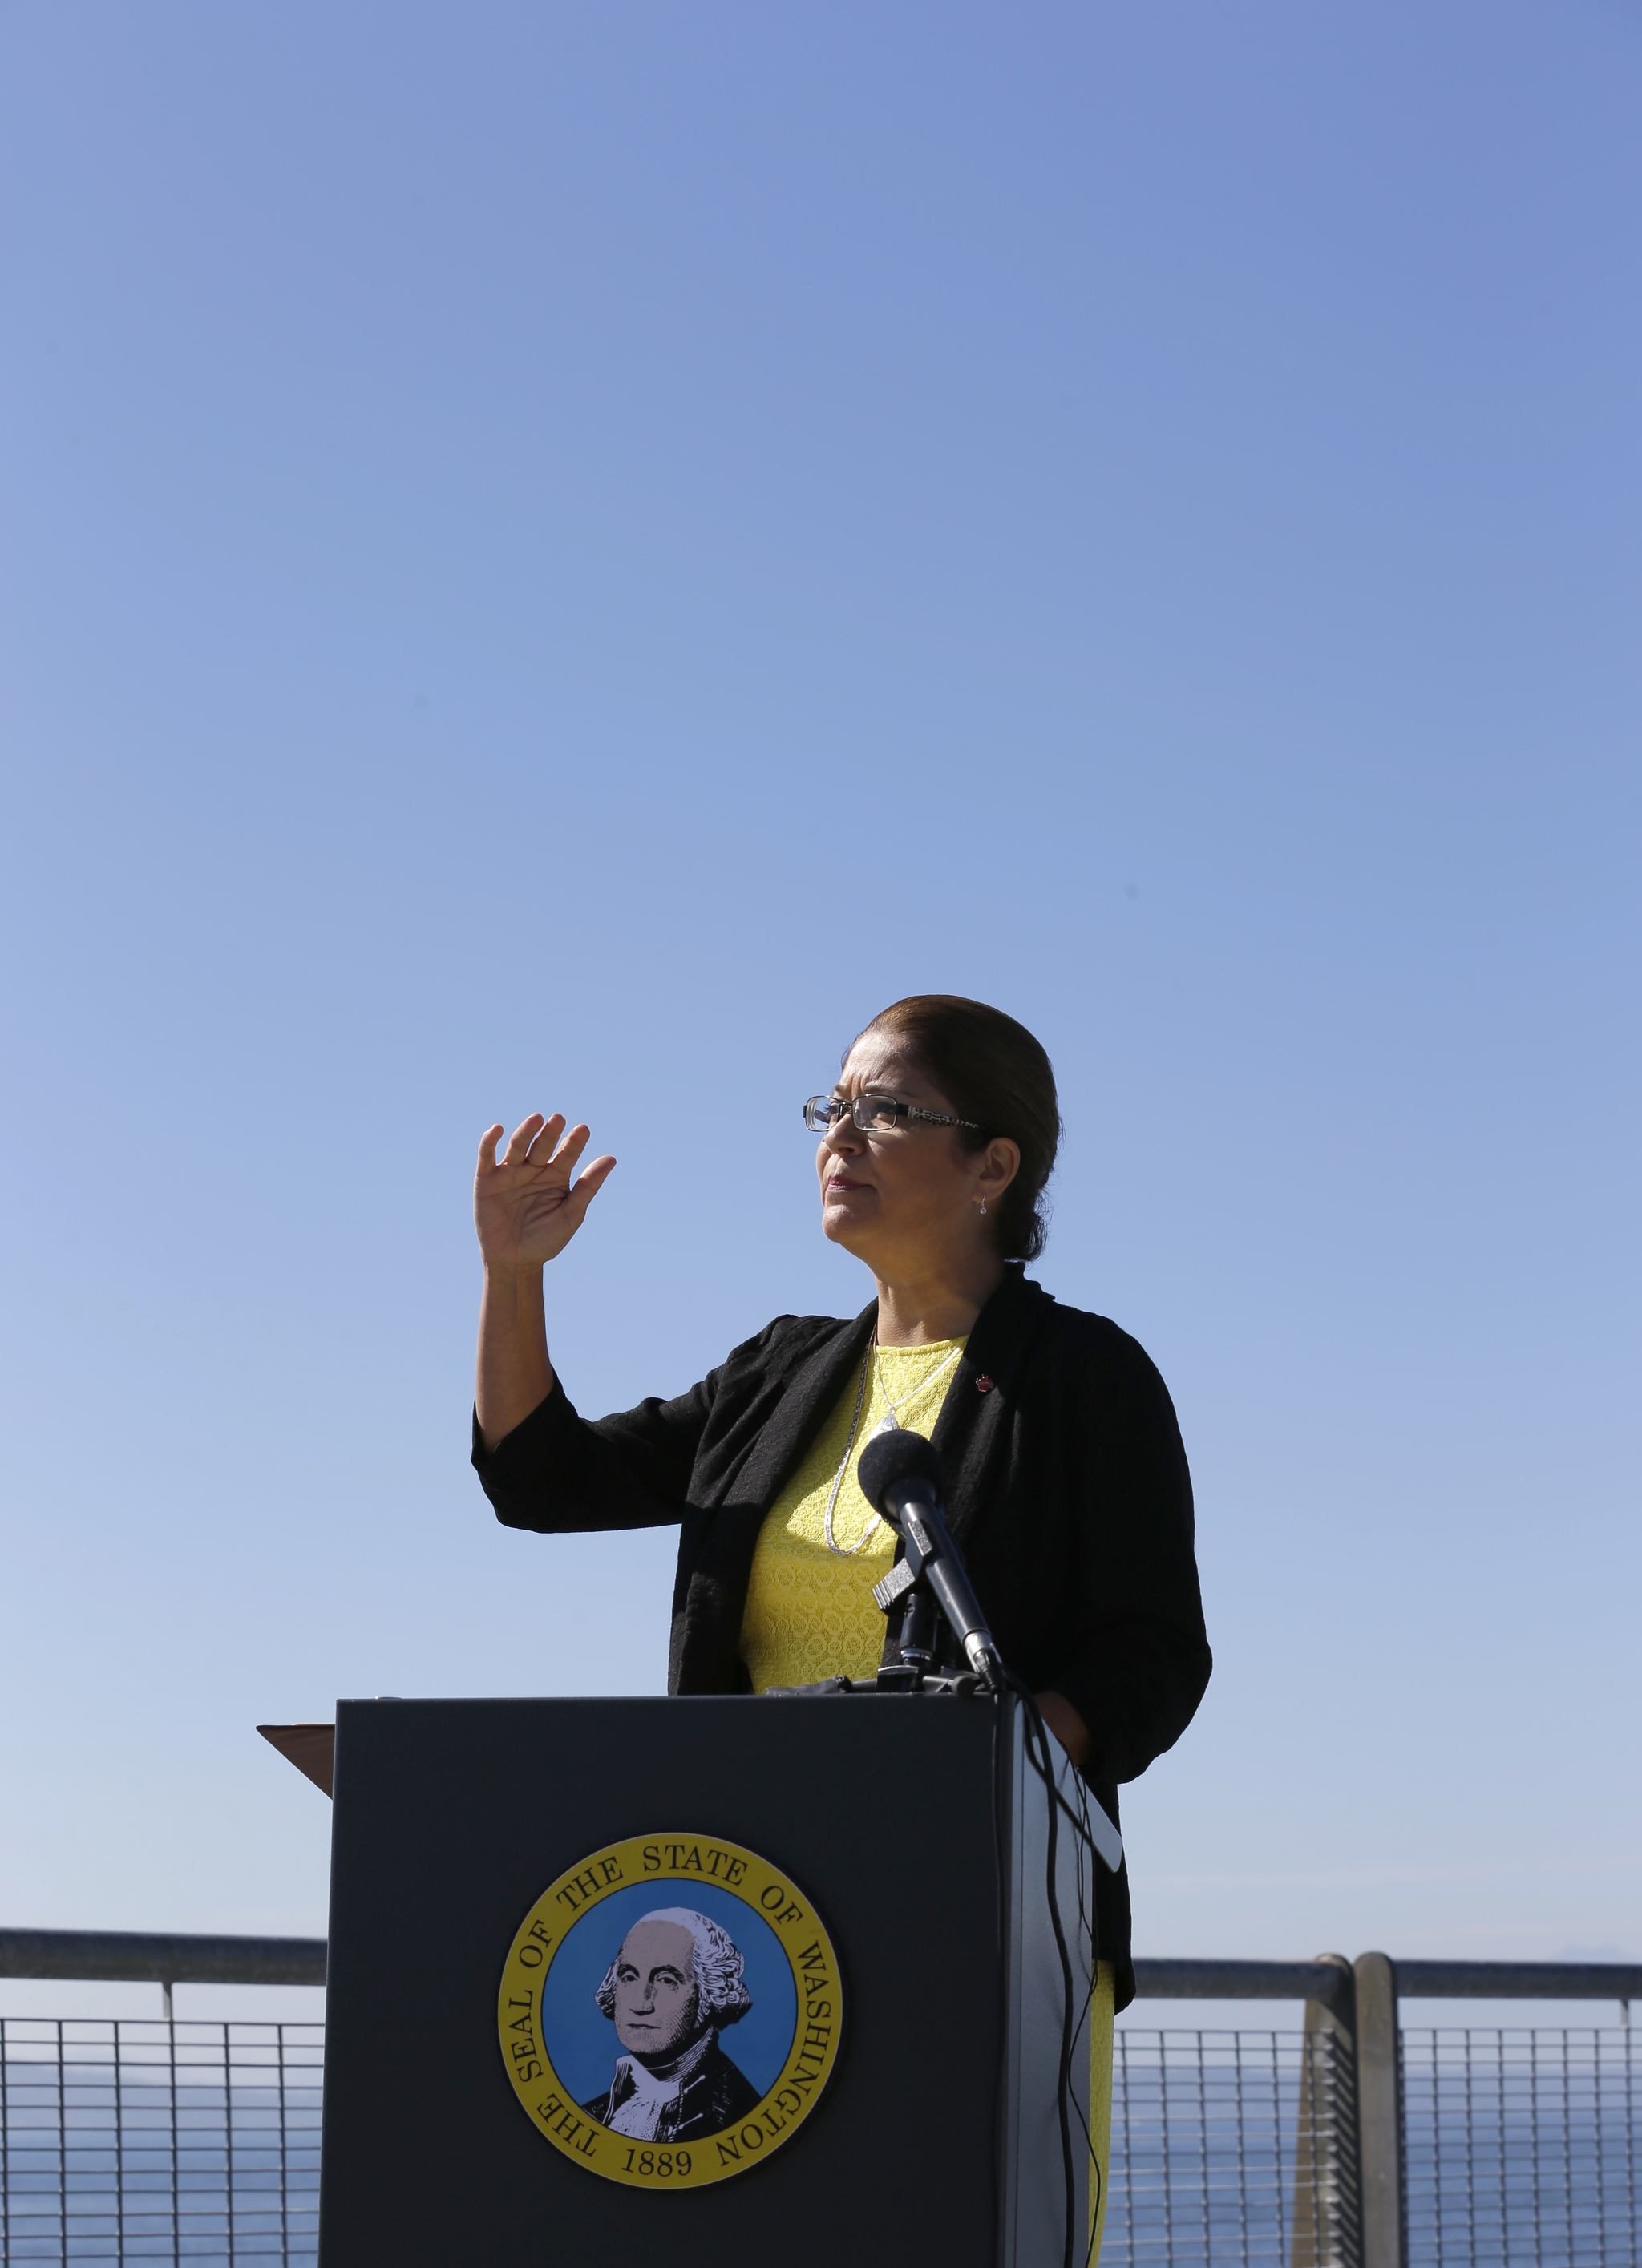 Maia Bellon, director of the state Department of Ecology, speaks at a news conference Thursday overlooking Elliott Bay in Seattle. (Ted S. Warren/The Associated Press)